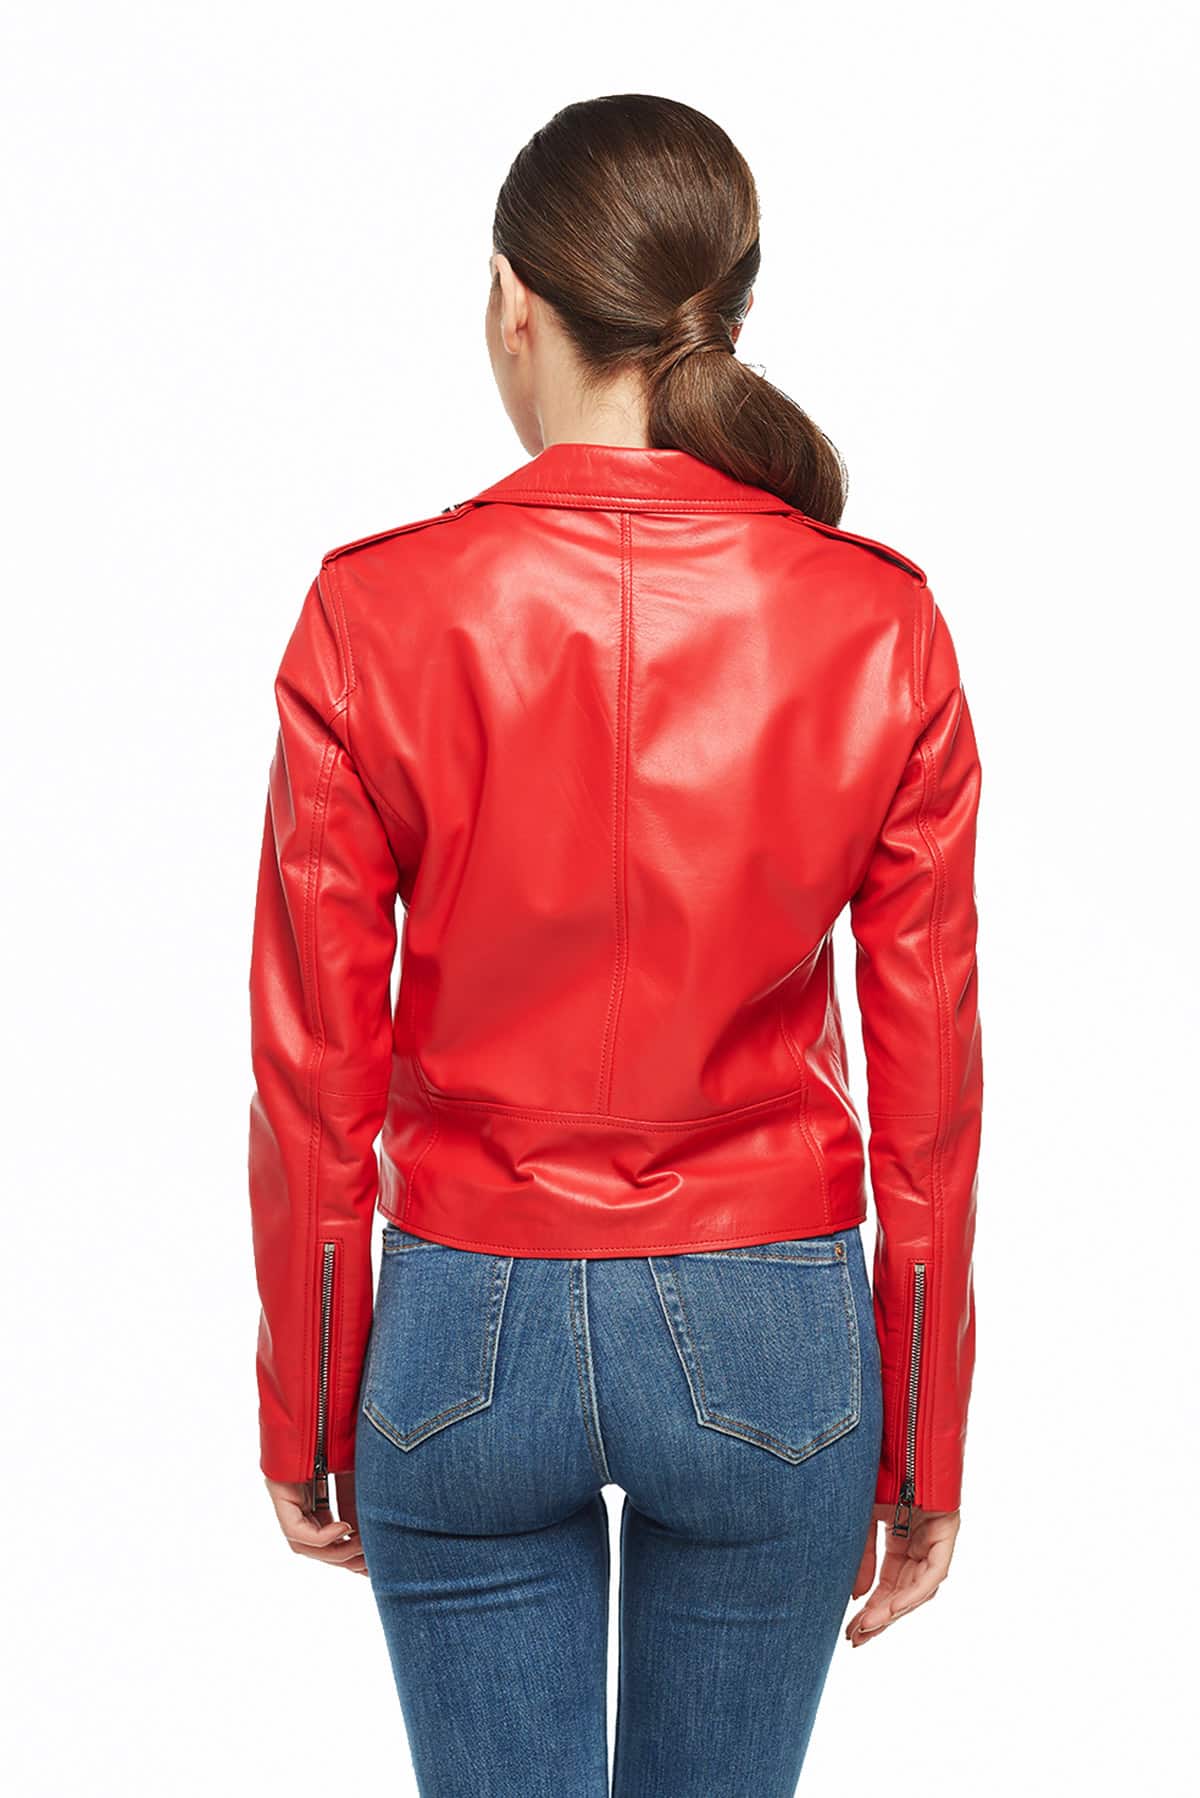 New Womens Motorcycle Genuine Sheep Leather Party Jacket LFW296 